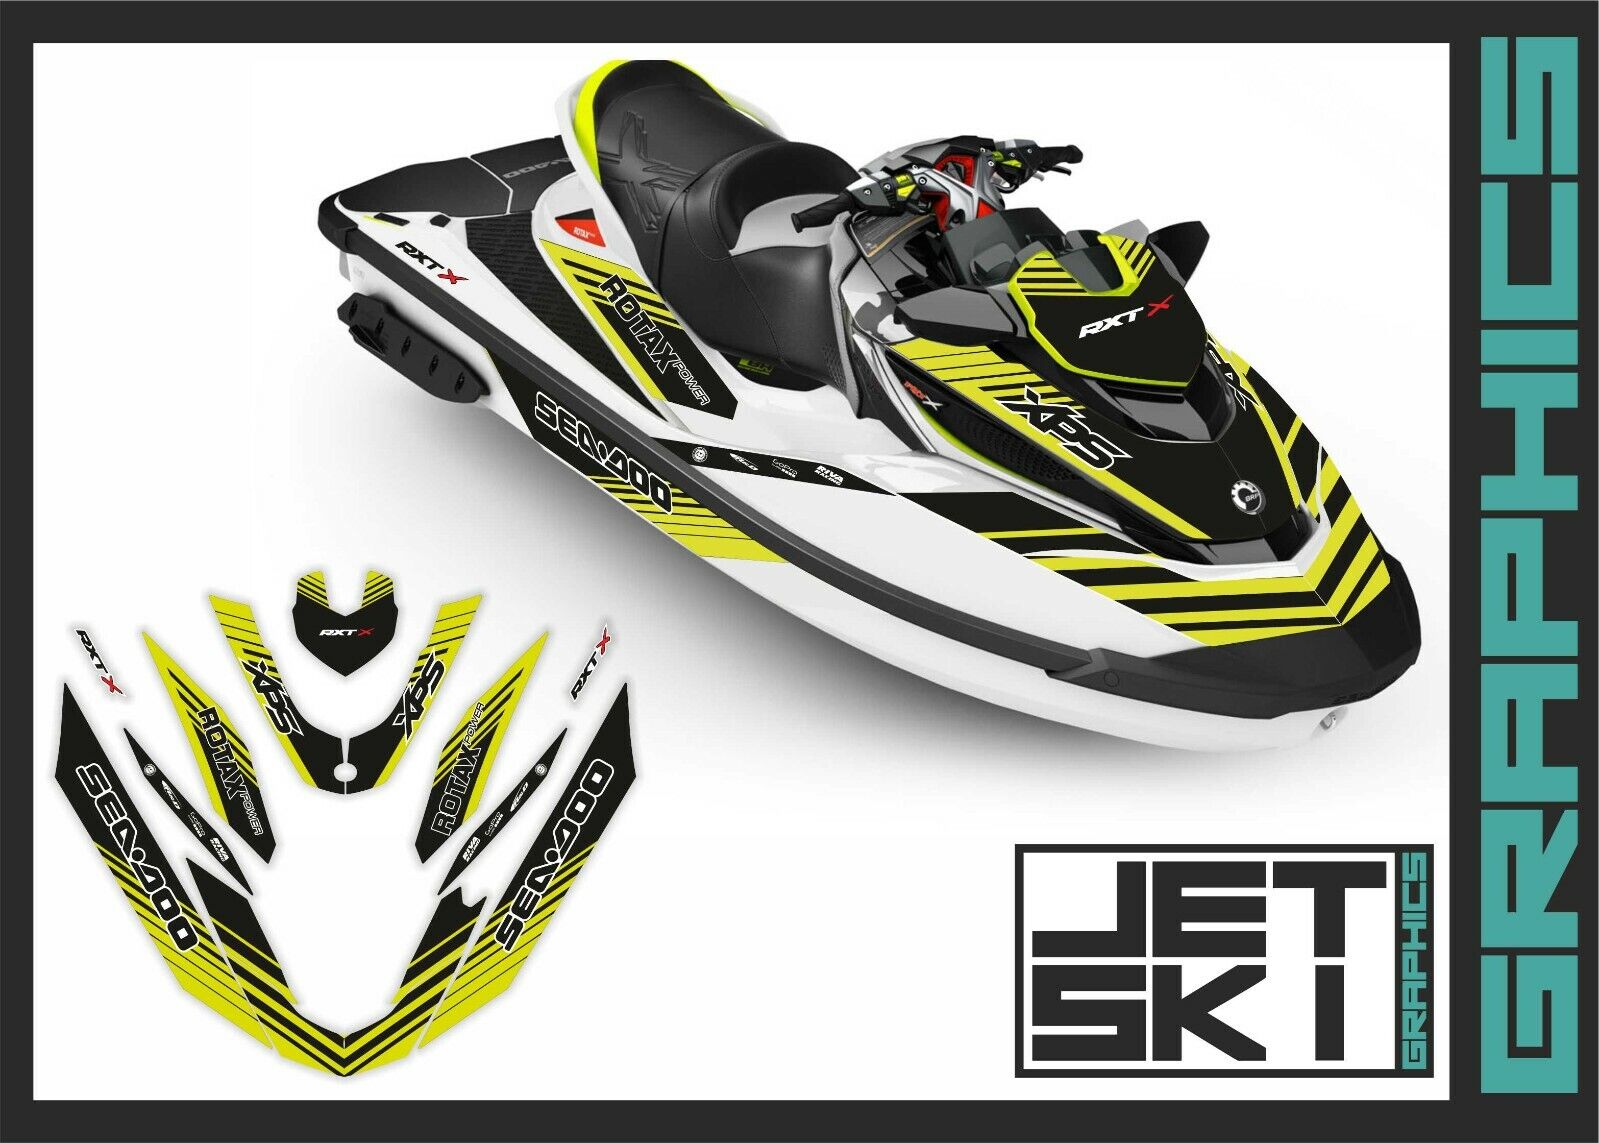 SEADOO RXT RXTX IS AS RS 300 for jet ski 2016-2017 graphics kit decals set wrap